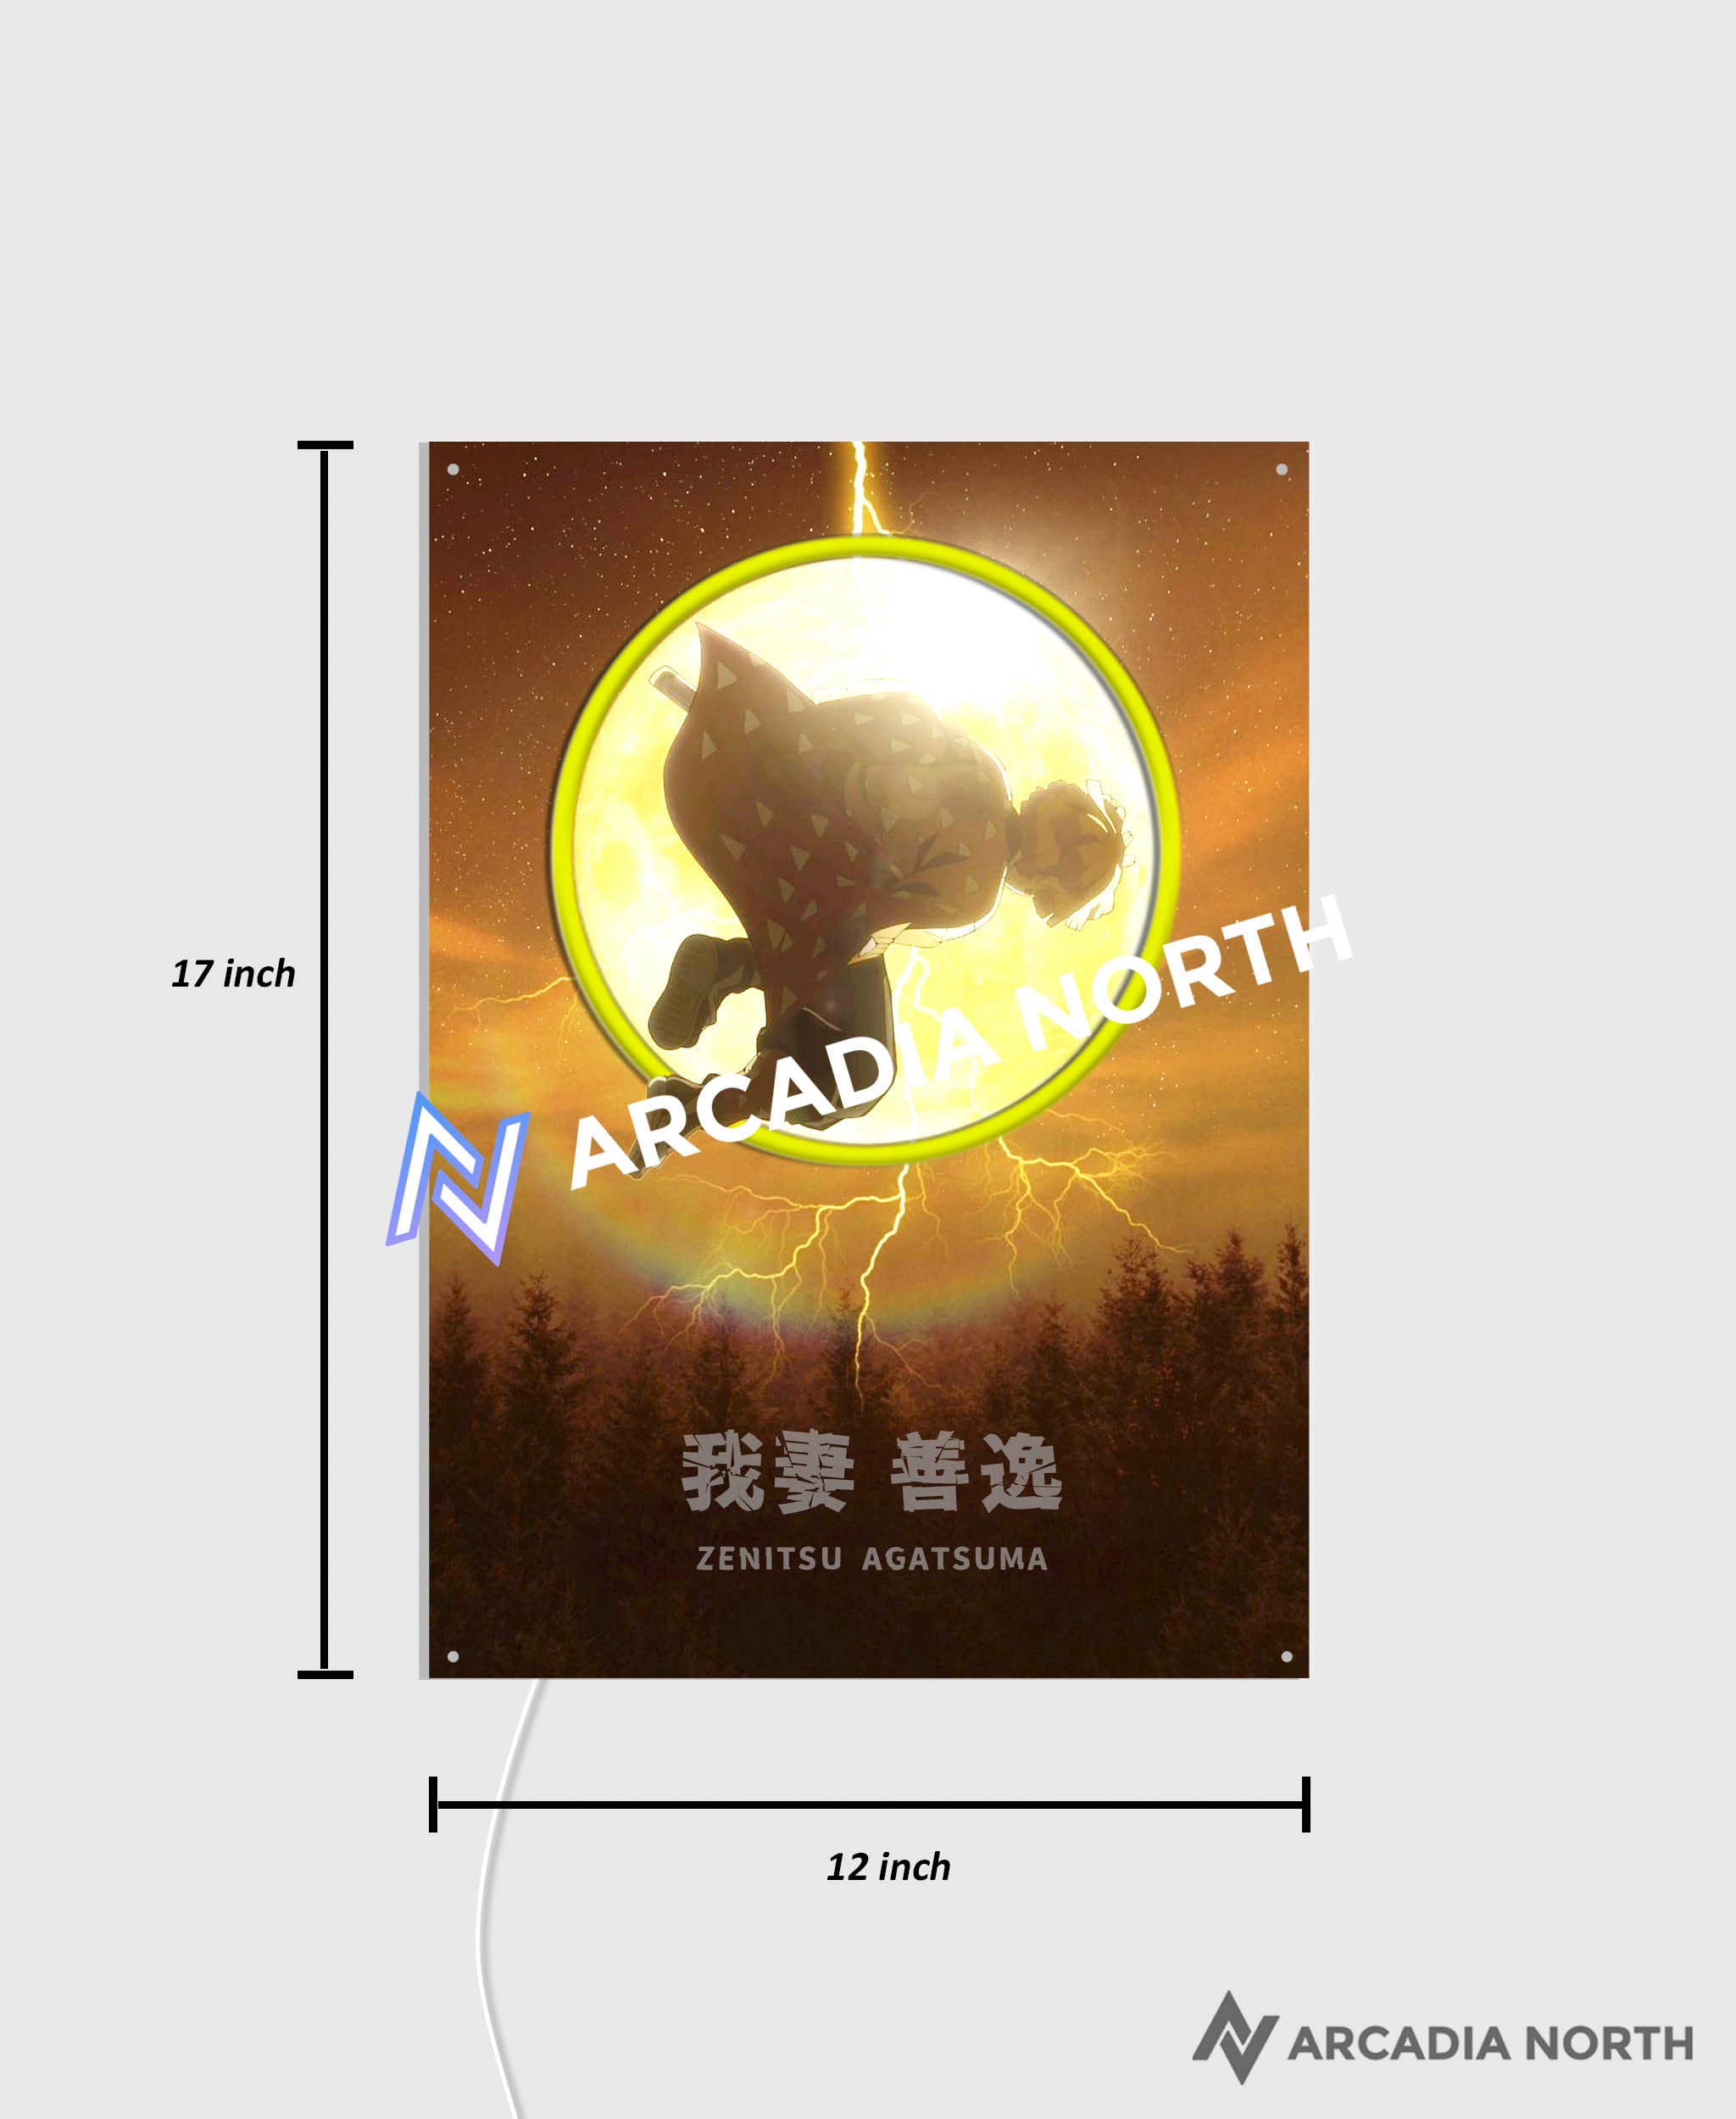 Arcadia North AURALIGHT Original LED Poster featuring the anime Demon Slayer with Zenitsu Agatsuma in front of a moon Illuminated by glowing neon LED lights. UV-printed on acrylic.